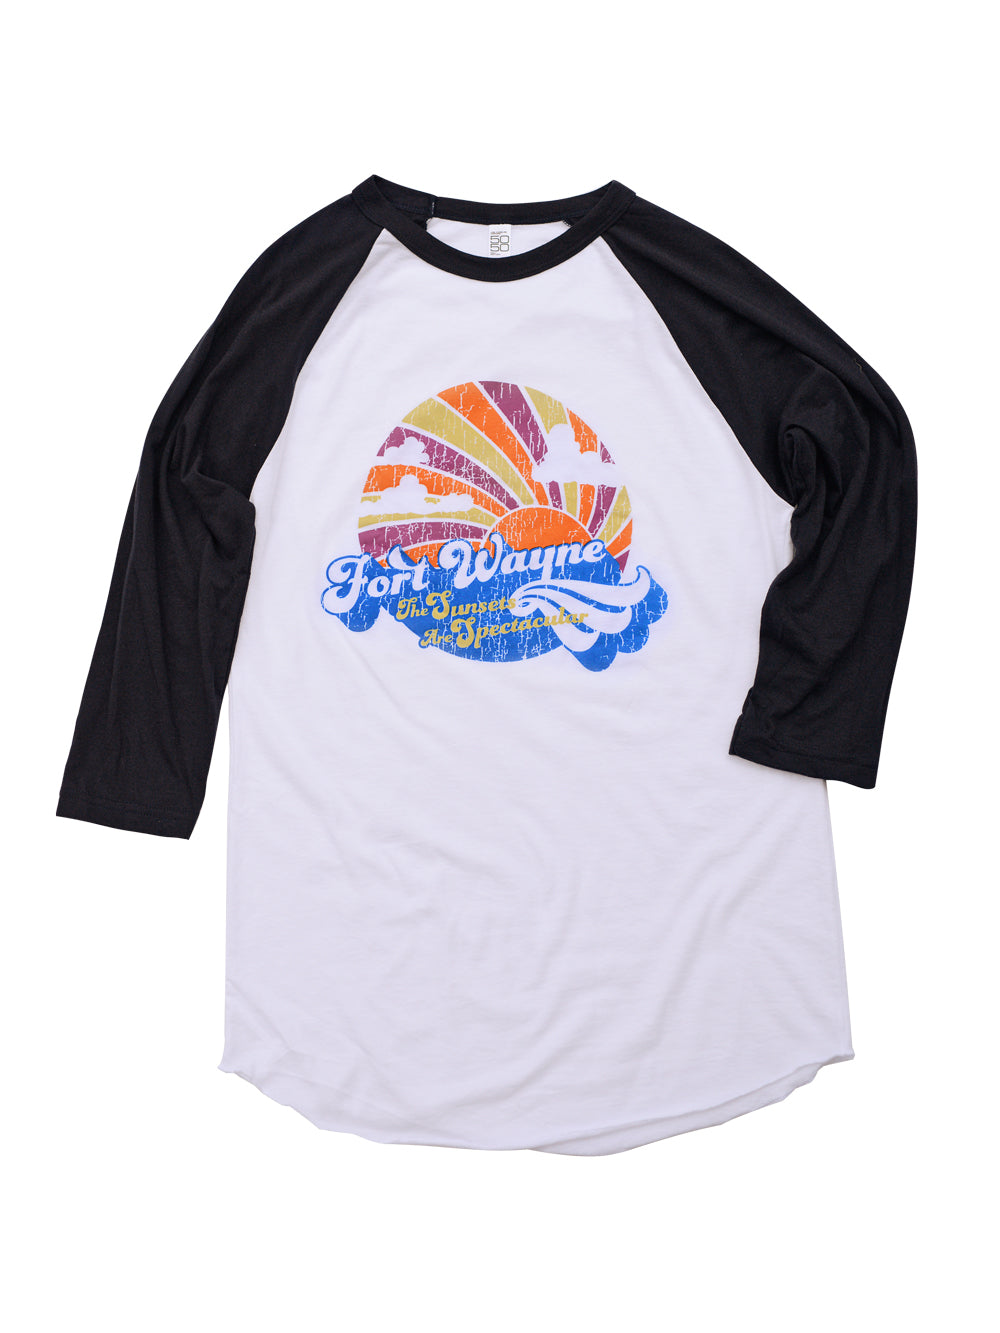 Fort Wayne the Sunsets are Spectacular Baseball Tee